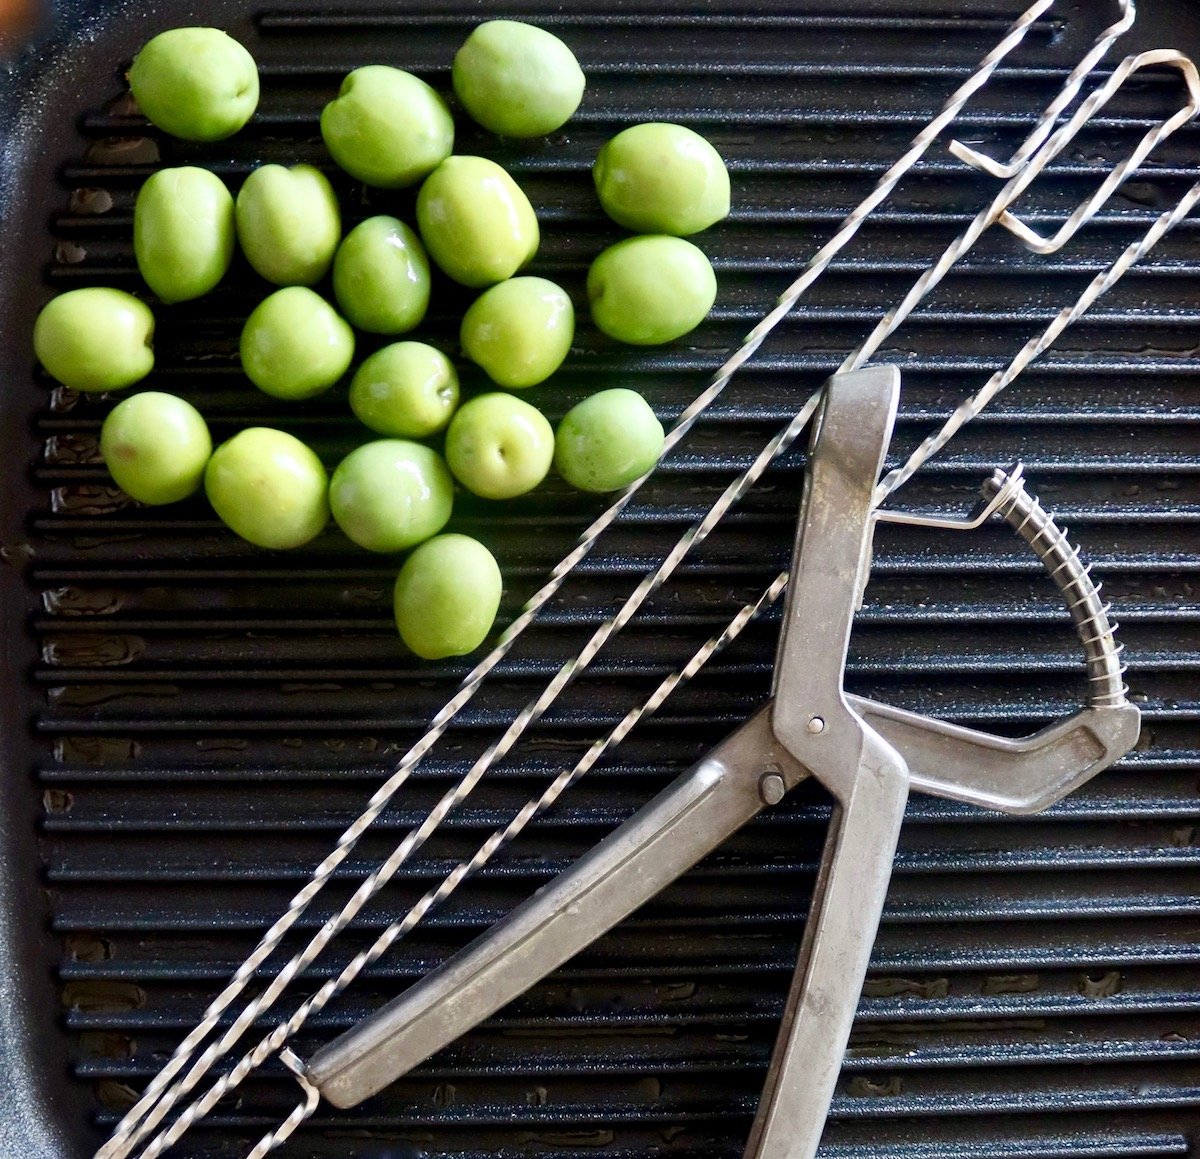 Black stove-top grill with olive pitter, green olives and three wire skewers.